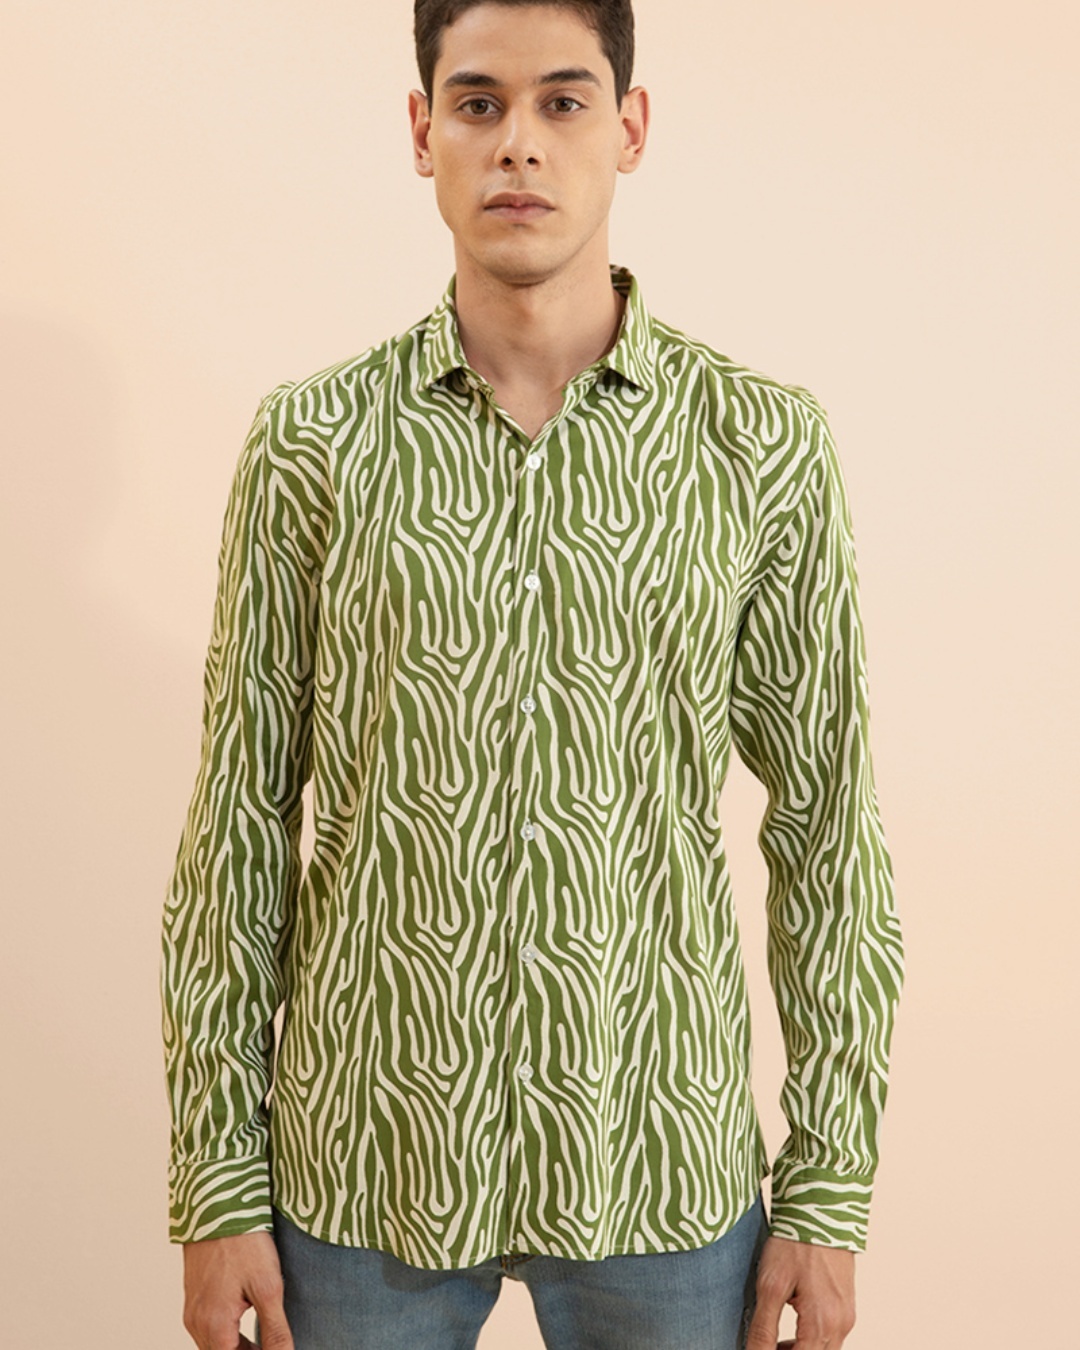 Buy Snitch Men's Green All Over Printed Slim Fit Shirt for Men Green ...